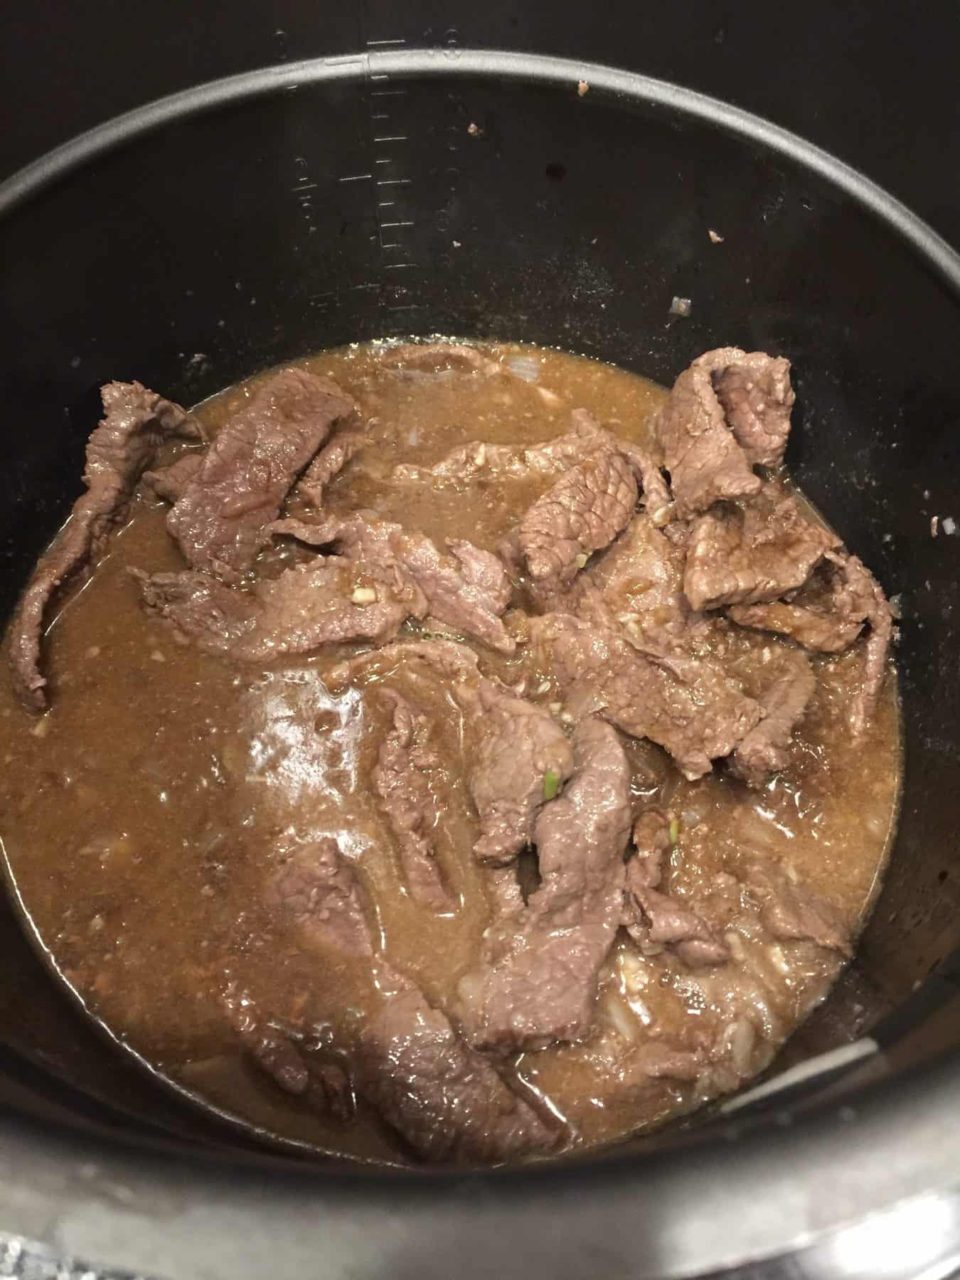 Beef broth mixture added to instant pot with beef slices for Instant Pot Beef with Broccoli